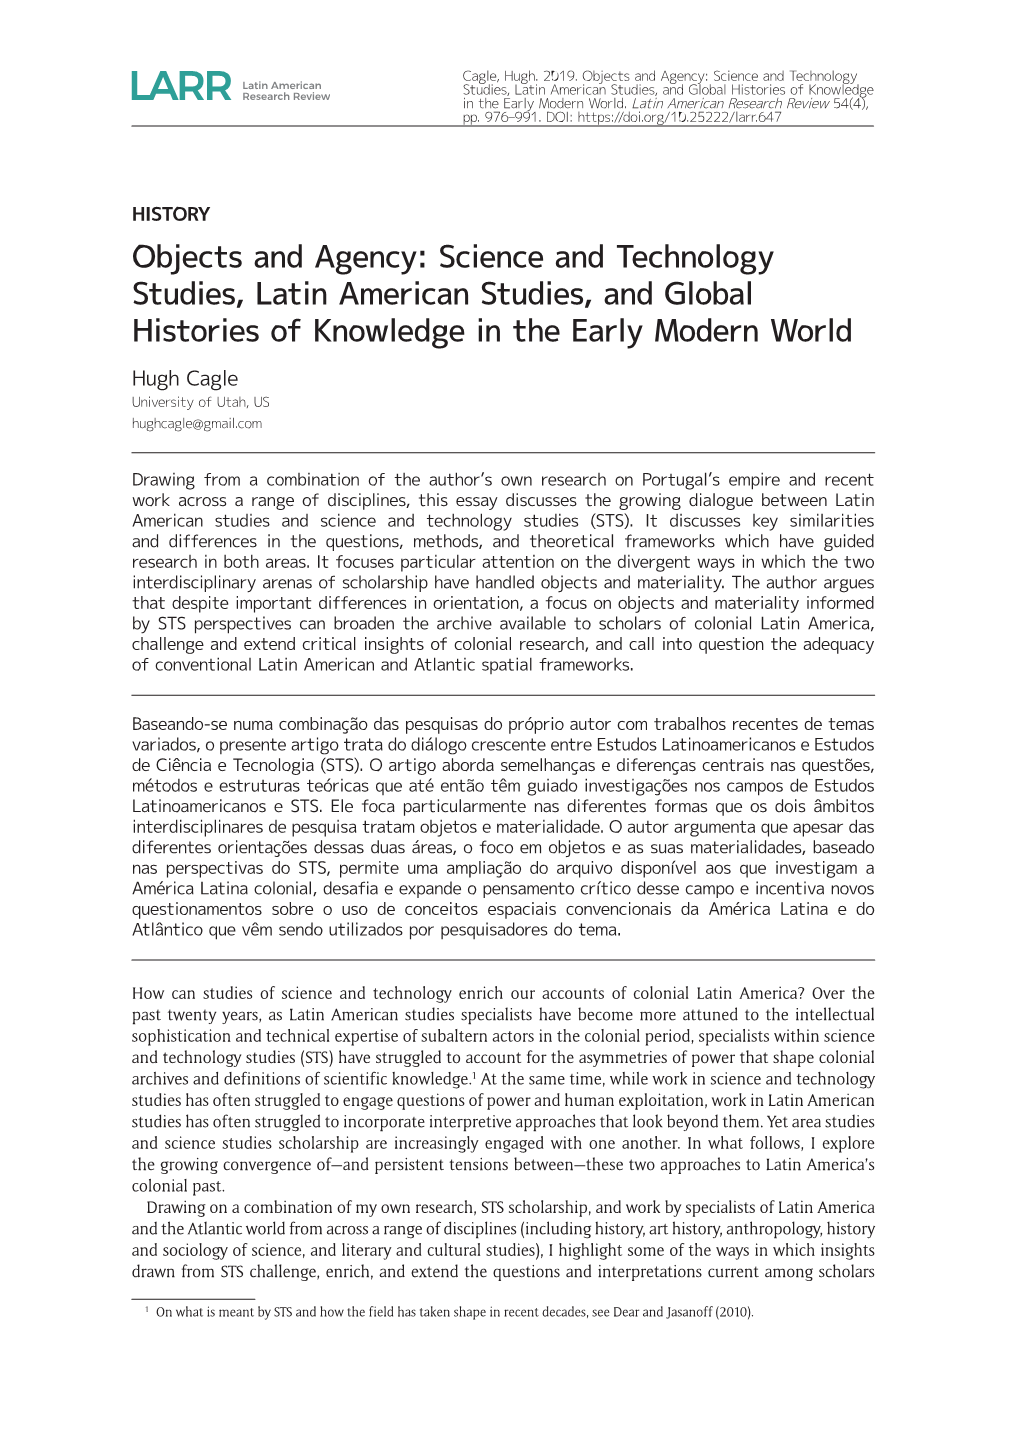 Objects and Agency: Science and Technology Studies, Latin American Studies, and Global Histories of Knowledge in the Early Modern World